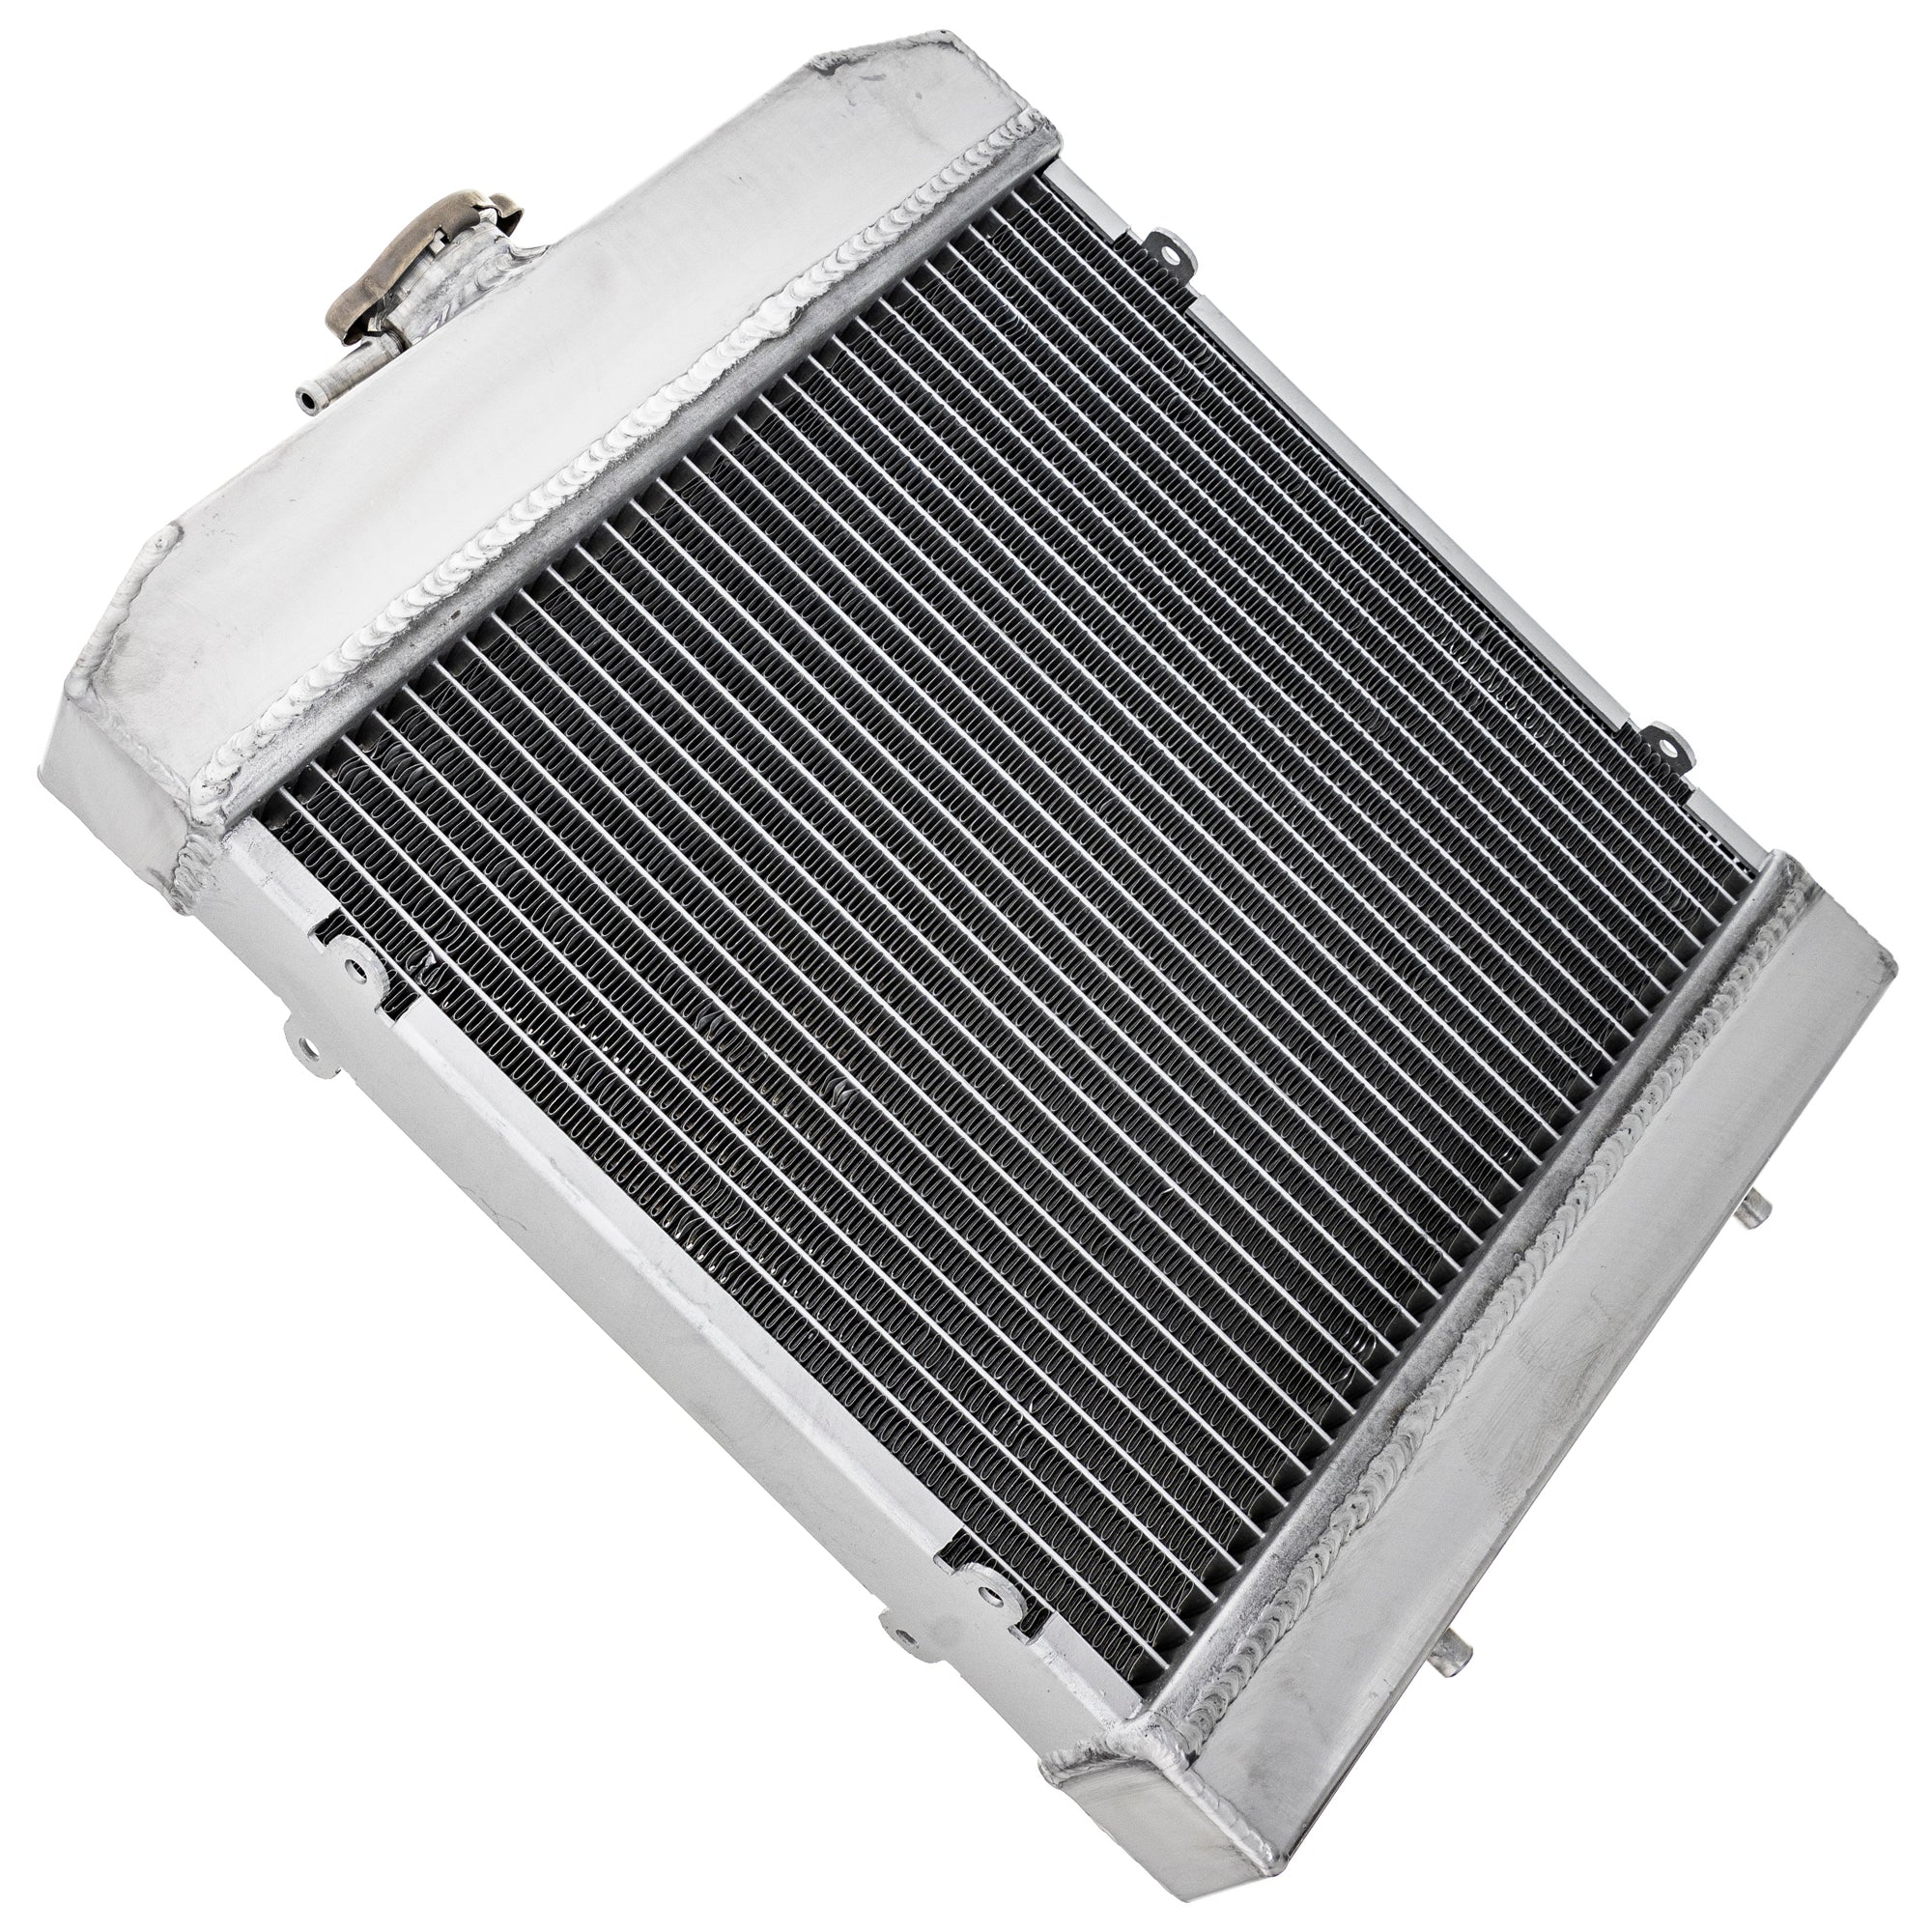 Radiator for Arctic Cat Alterra 550 Prowler 650 XT 700 0413-205 with